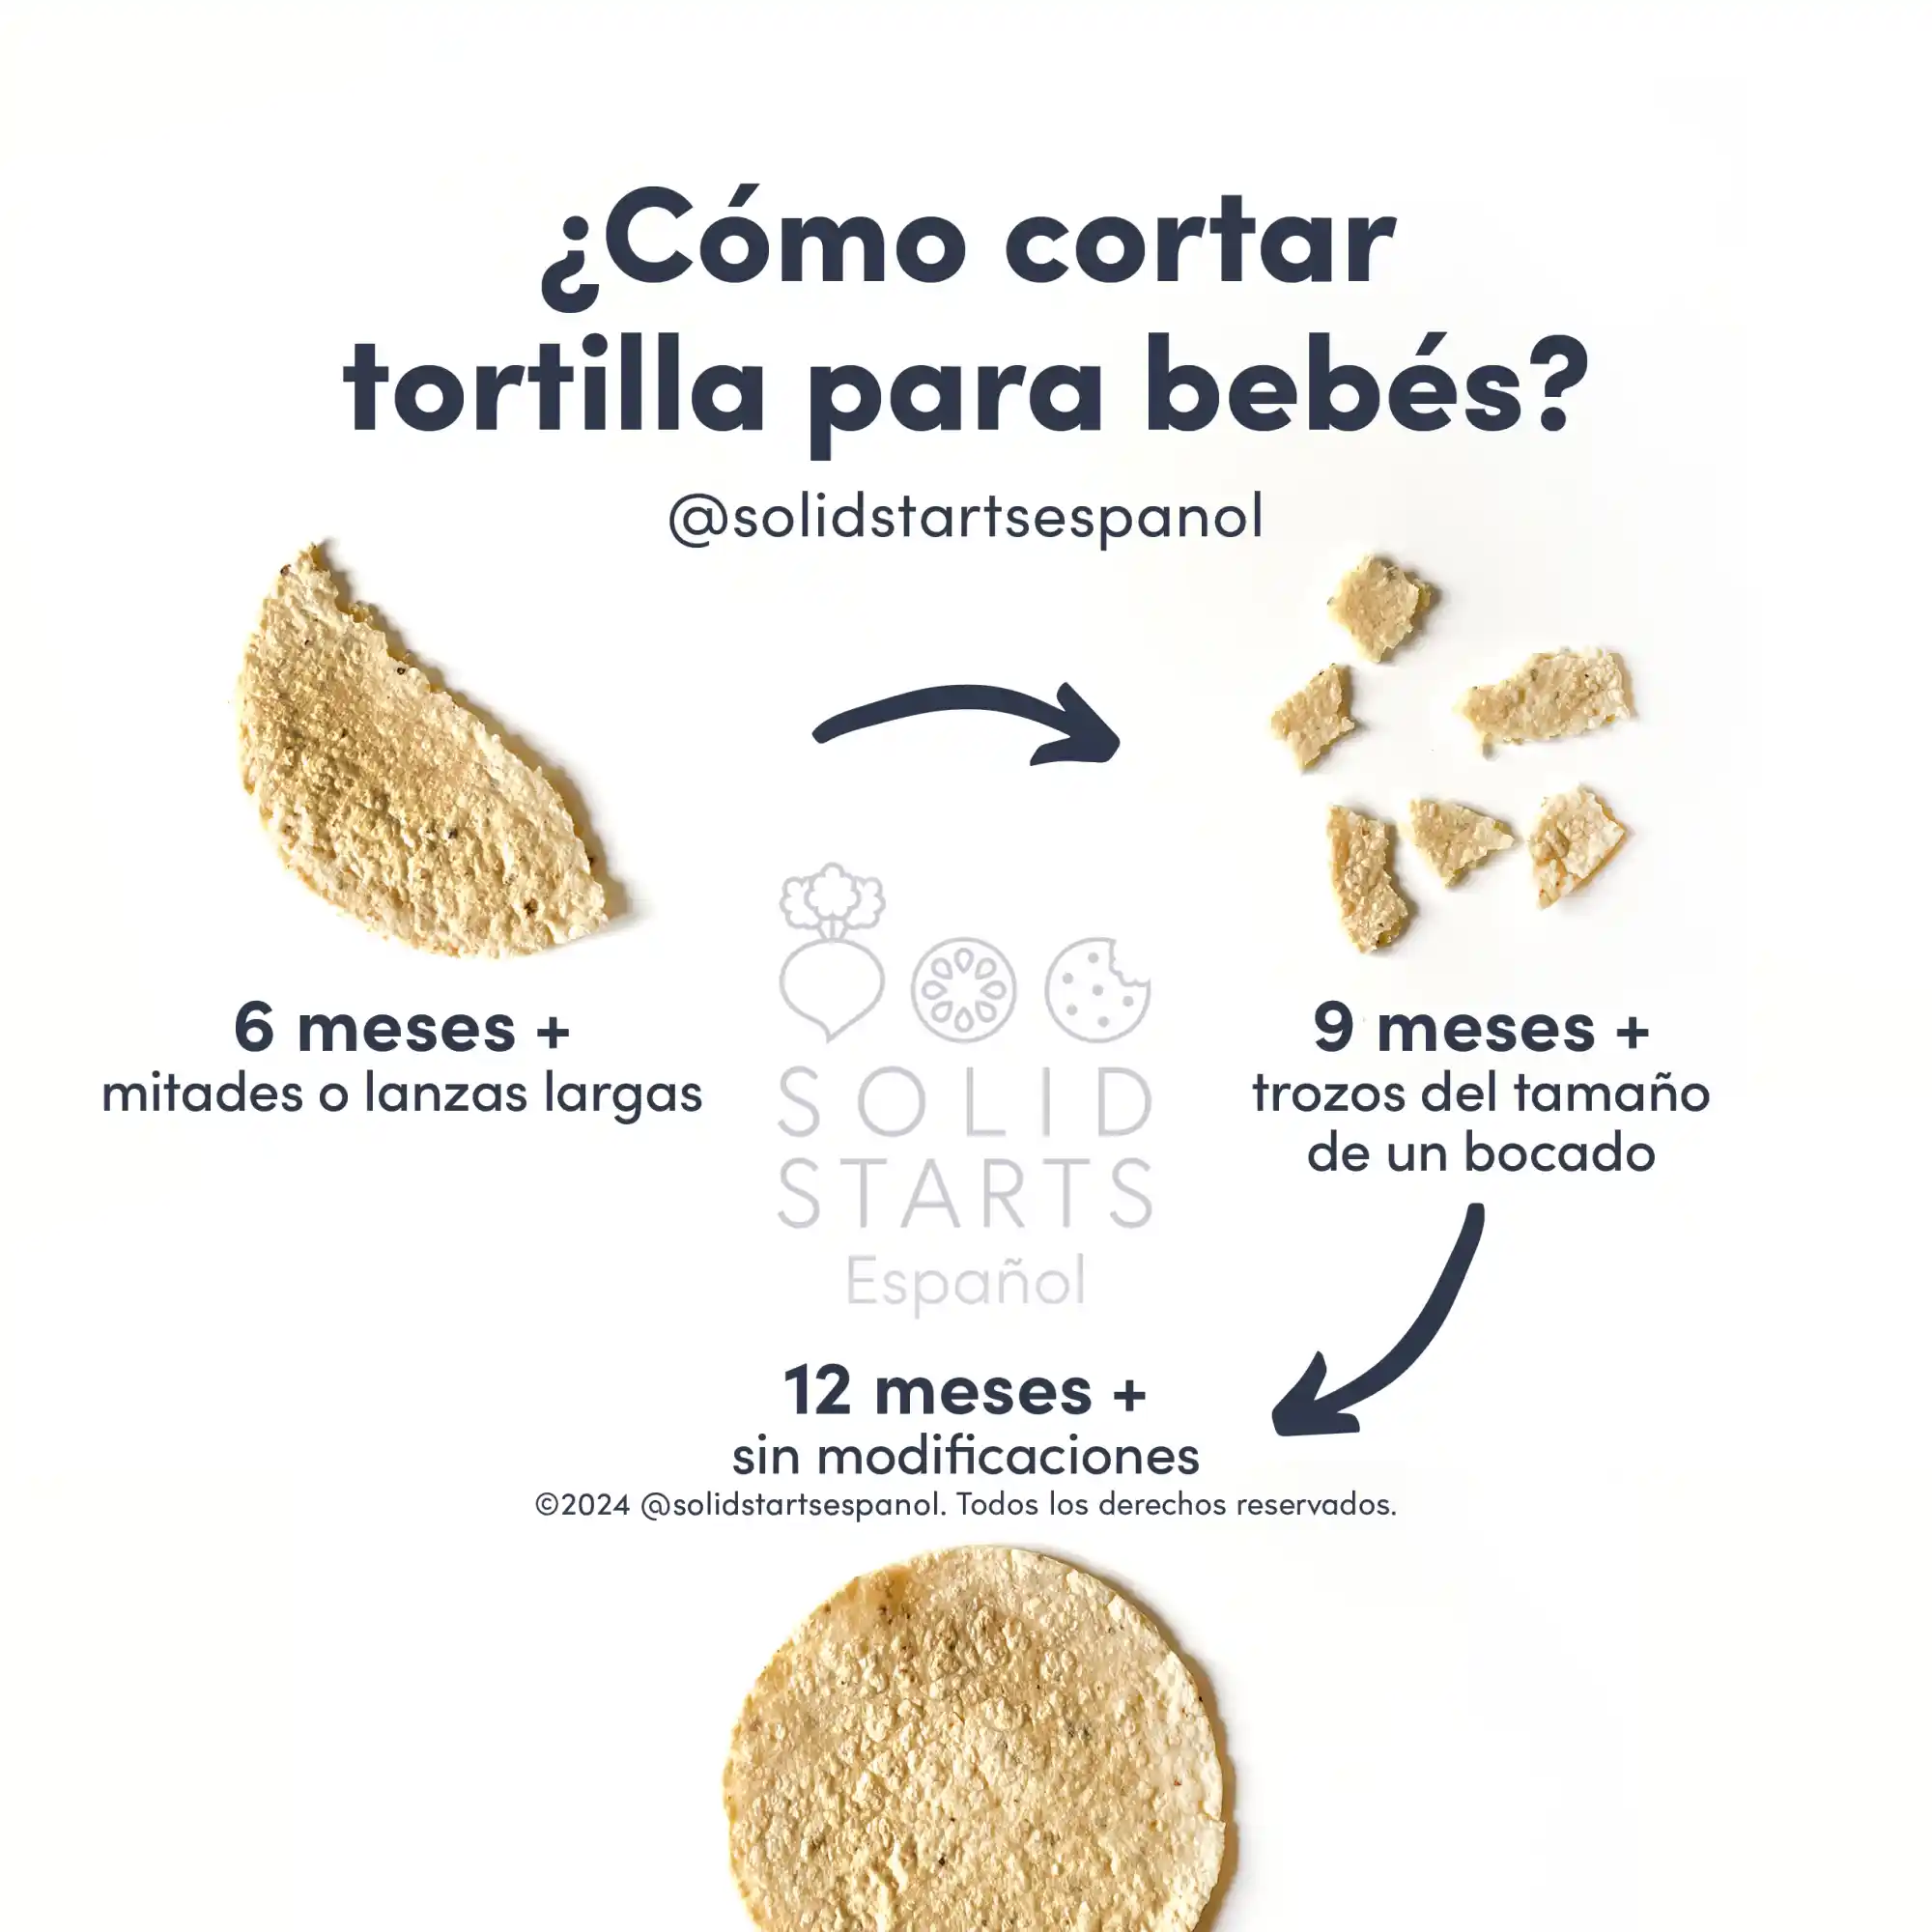 an infographic with the header "how to cut tortilla for babies": in half or long strips for 6 months+, bite-sized pieces for 9 months+, no modifications for 12 months+